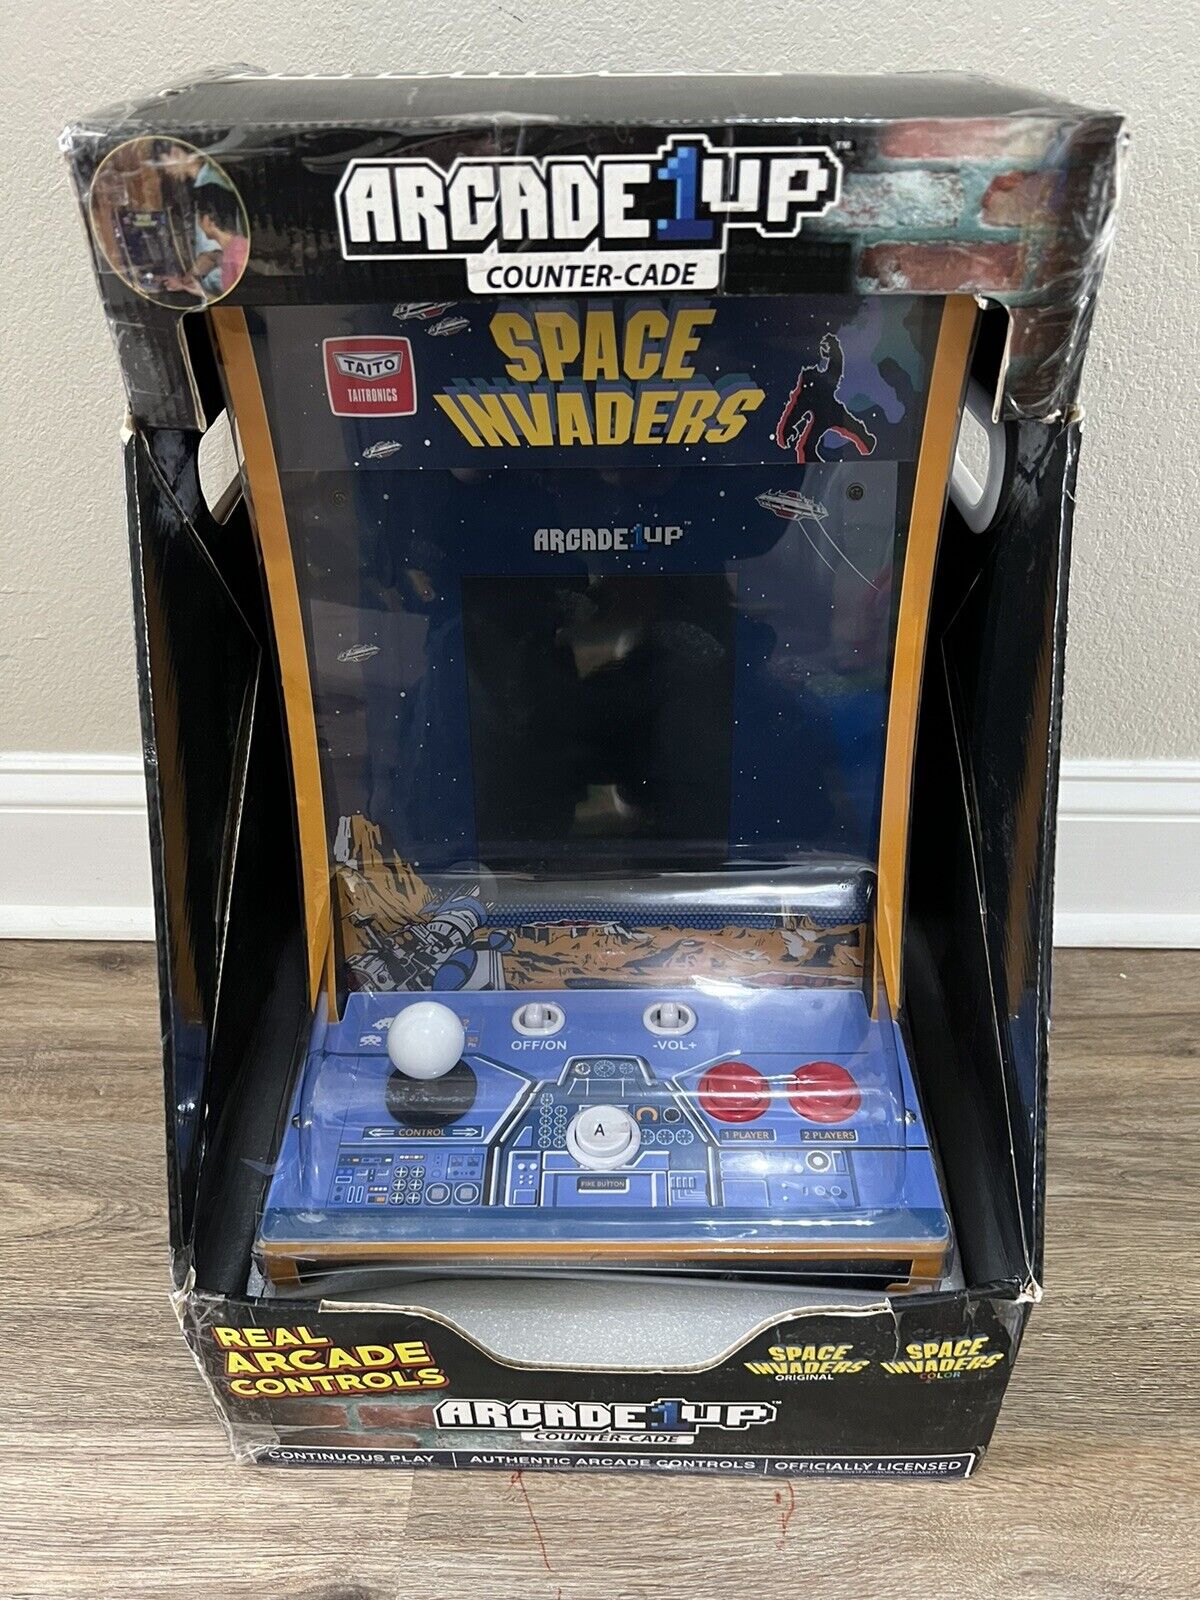 Arcade1up Space Invaders Countercade  Arcade Machine NEW IN FACTORY BOX - RARE